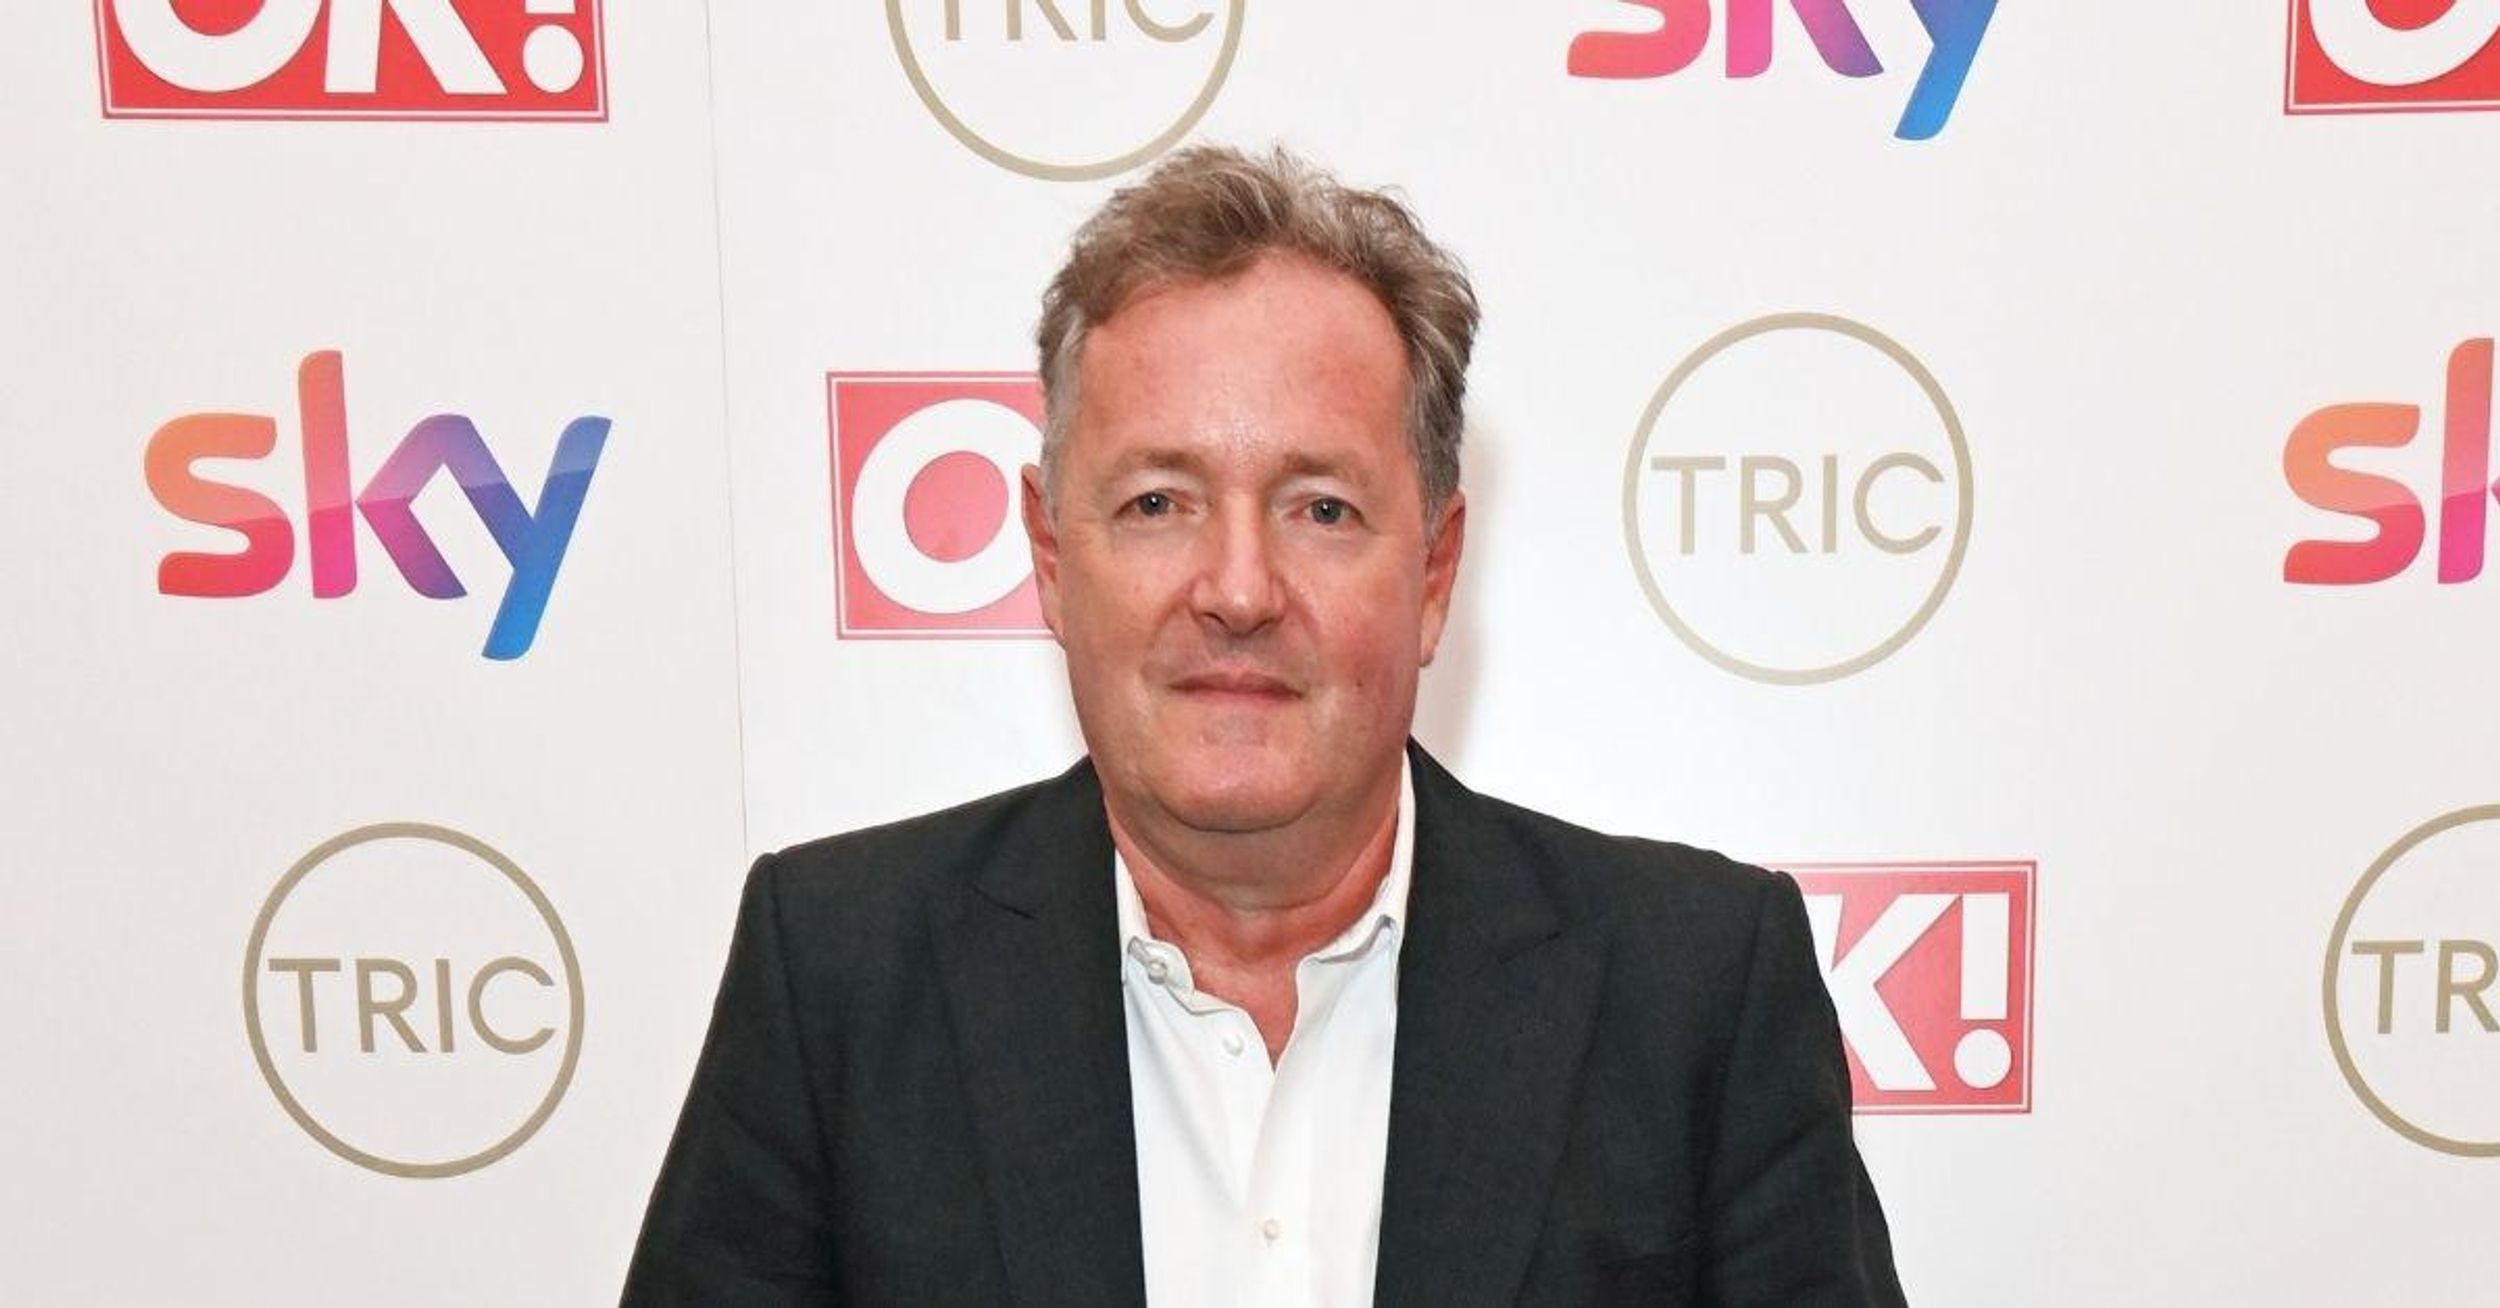 Piers Morgan Just Announced He's Joining Fox News—And The Internet Collectively Groaned